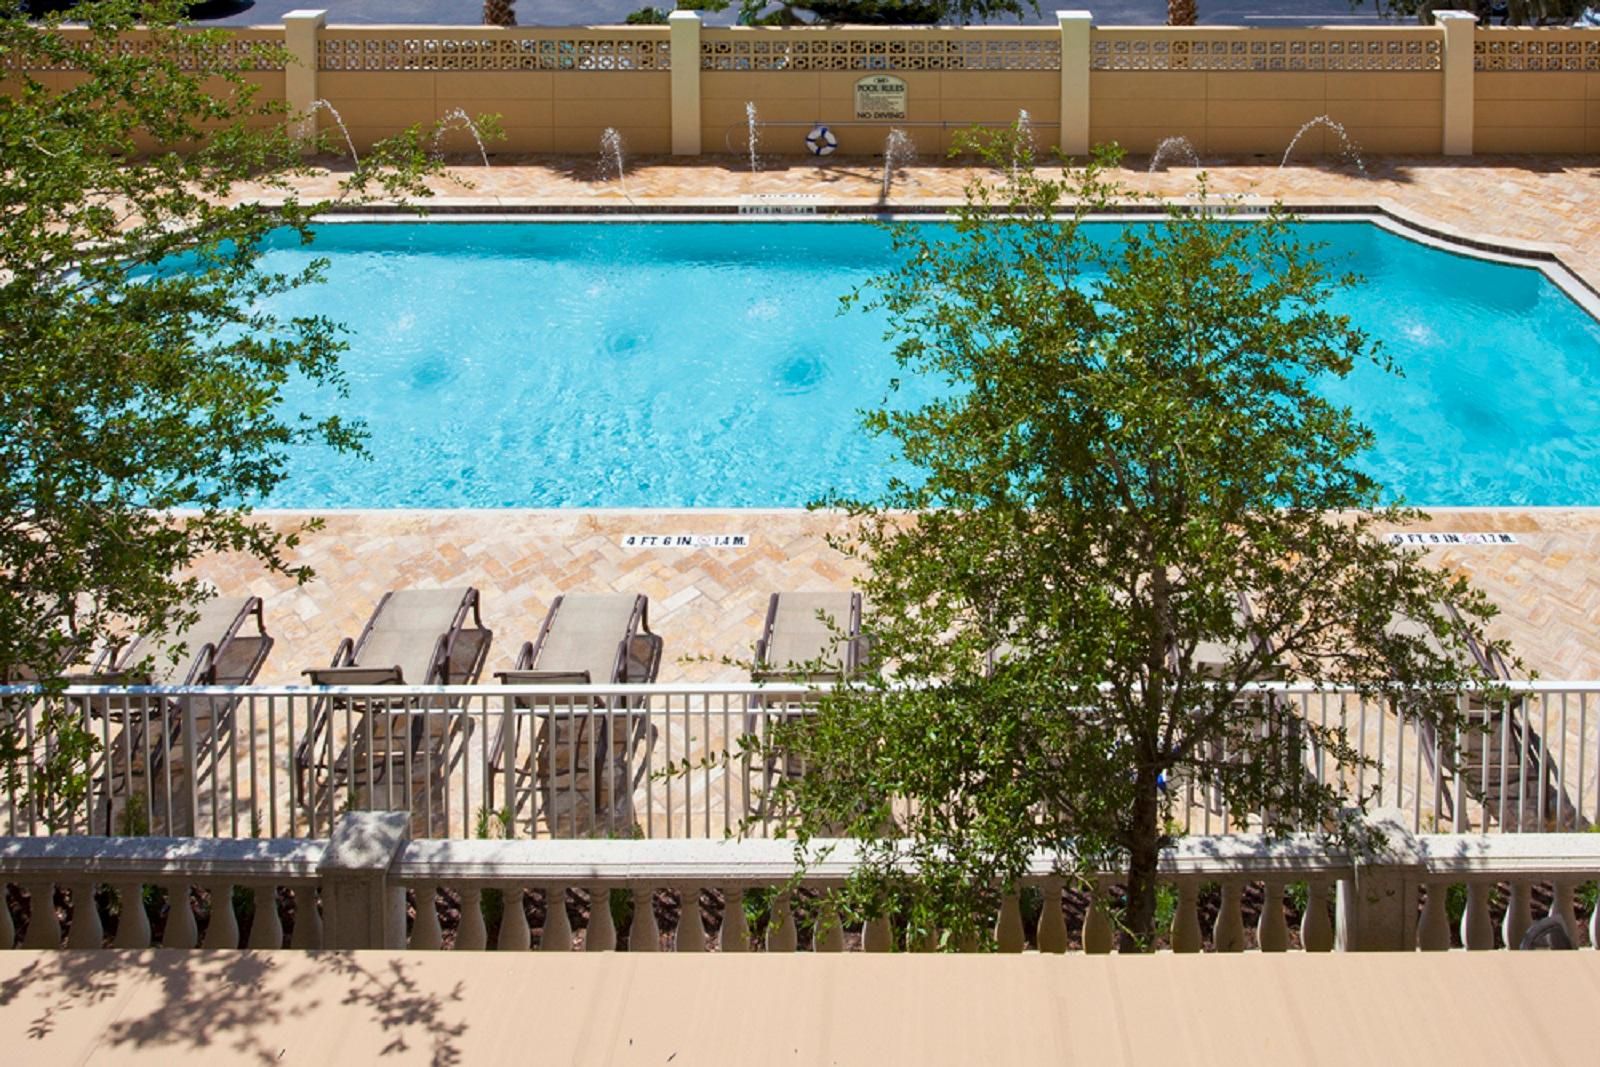 Have a morning or afternoon dip in our outdoor pool